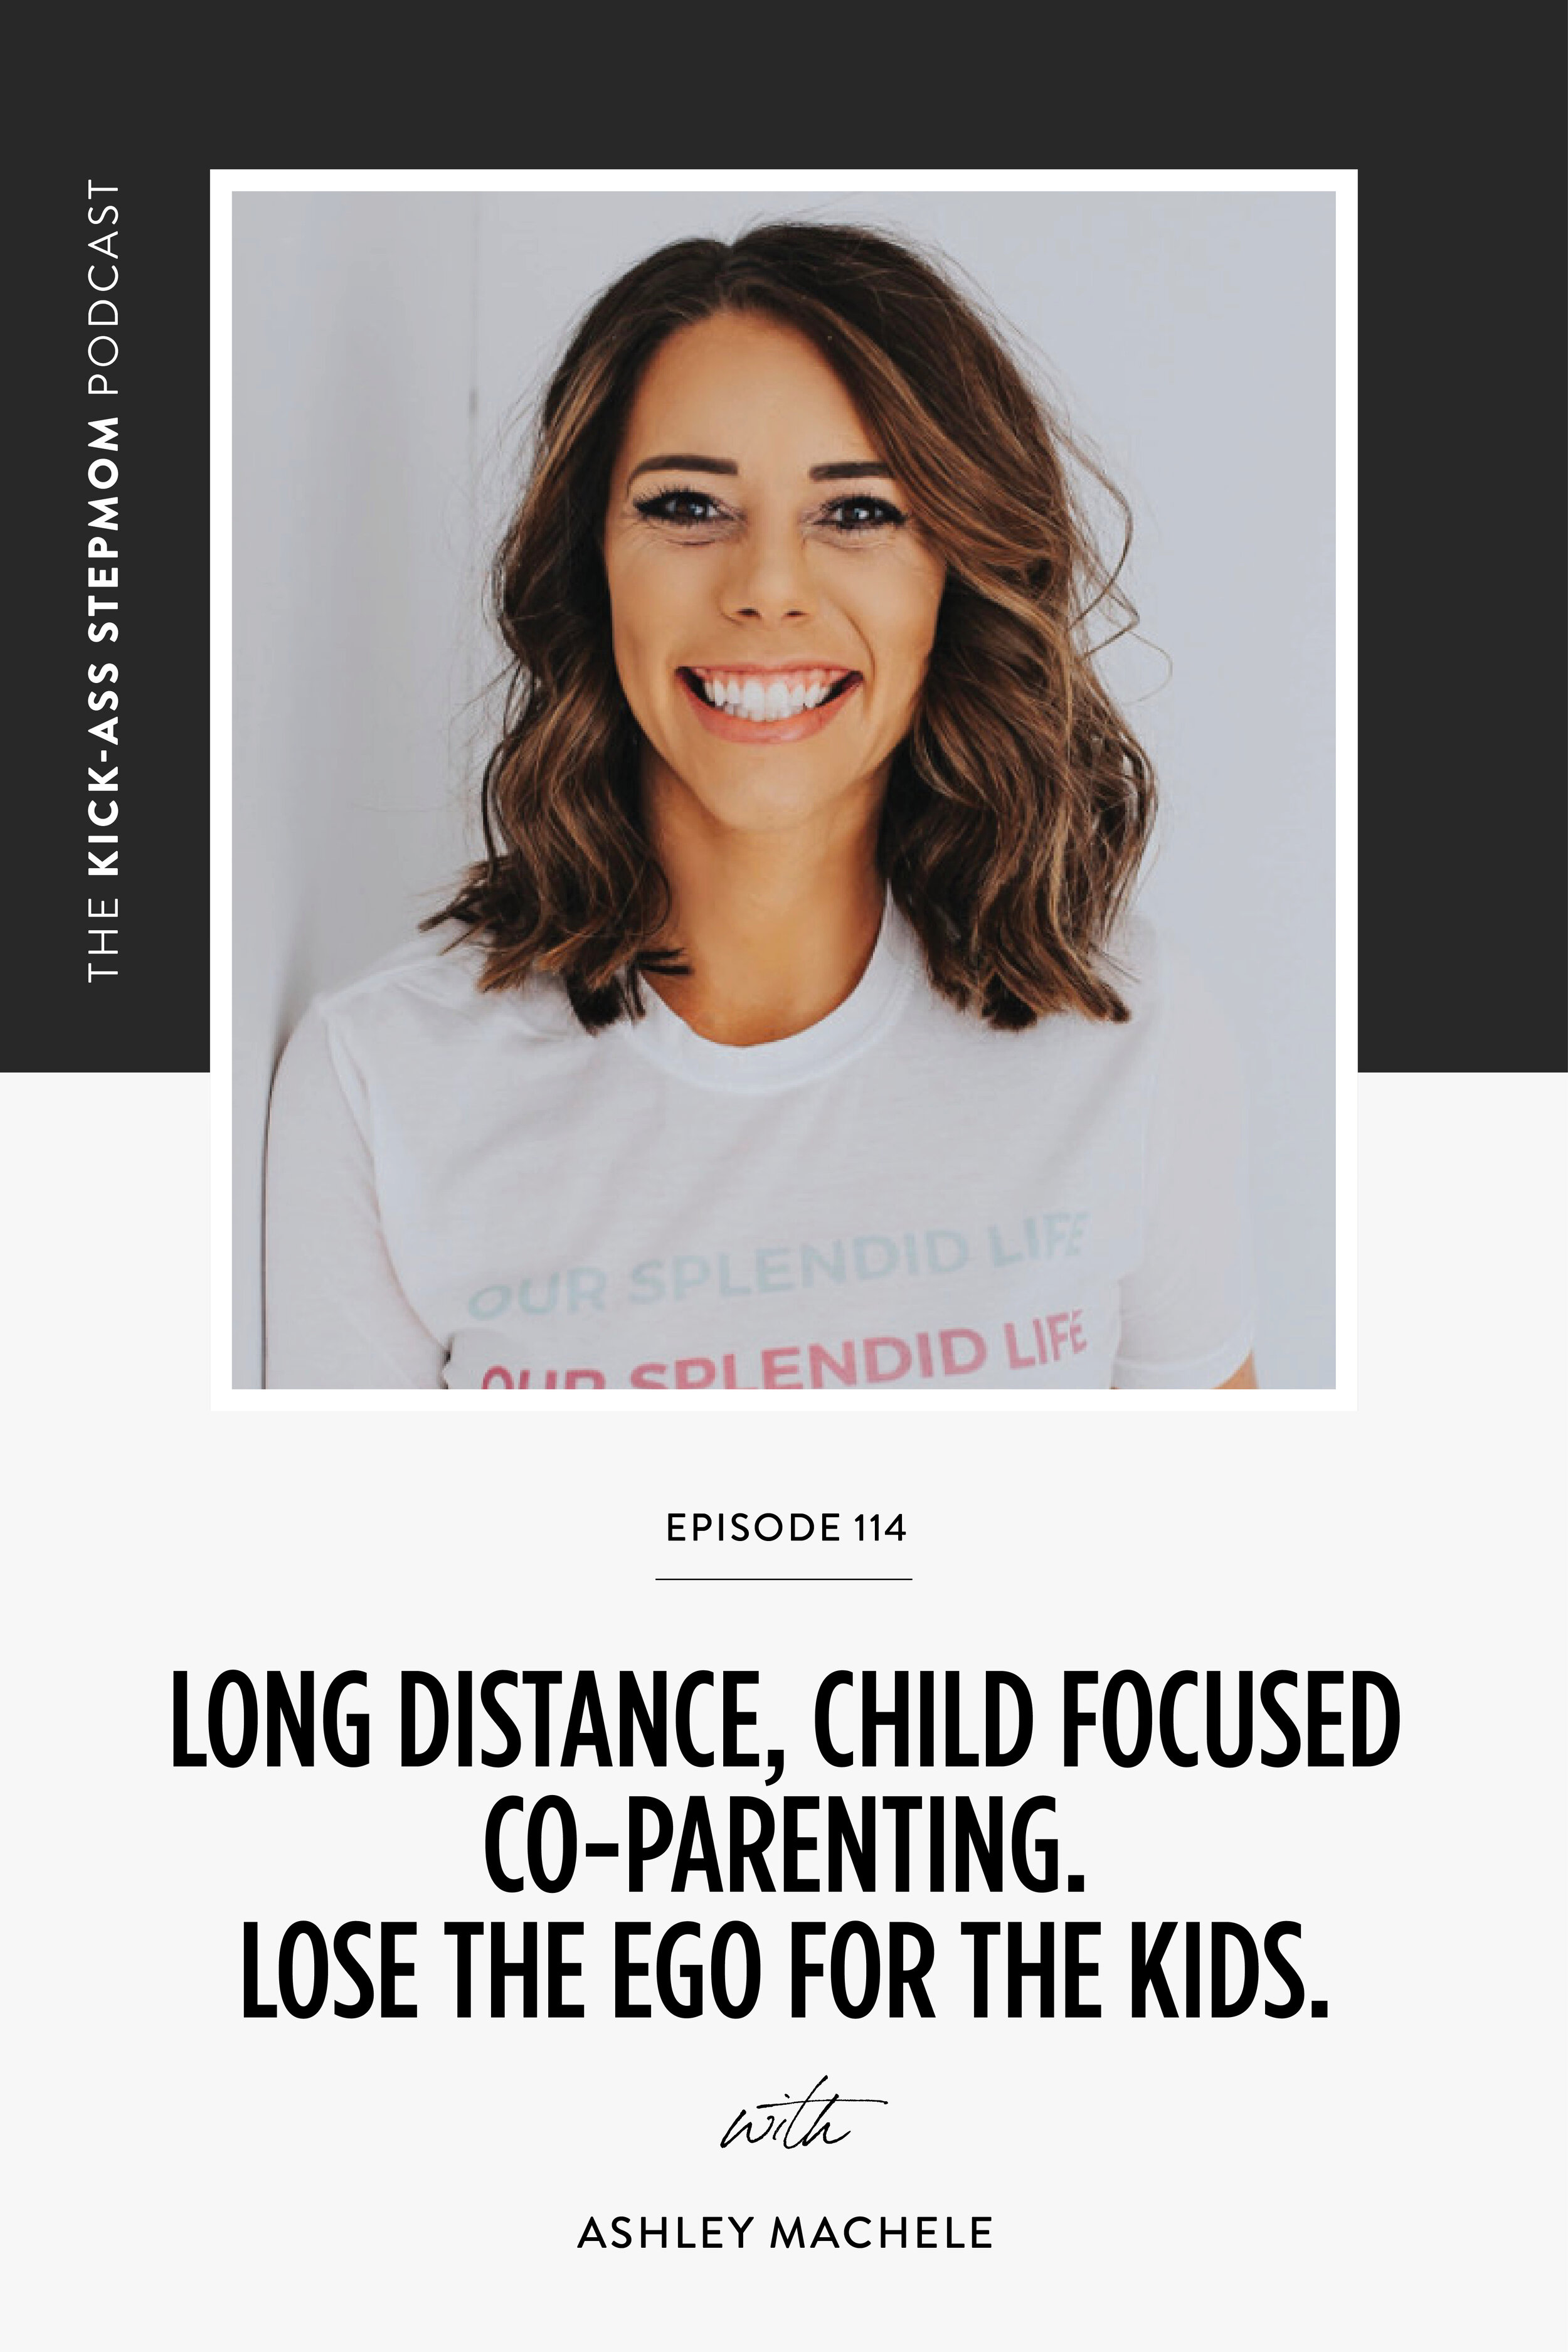 Long Distance, Child Focused Co-Parenting. Lose the Ego For The Kids with Ashley Machele  | Co-Parenting Support